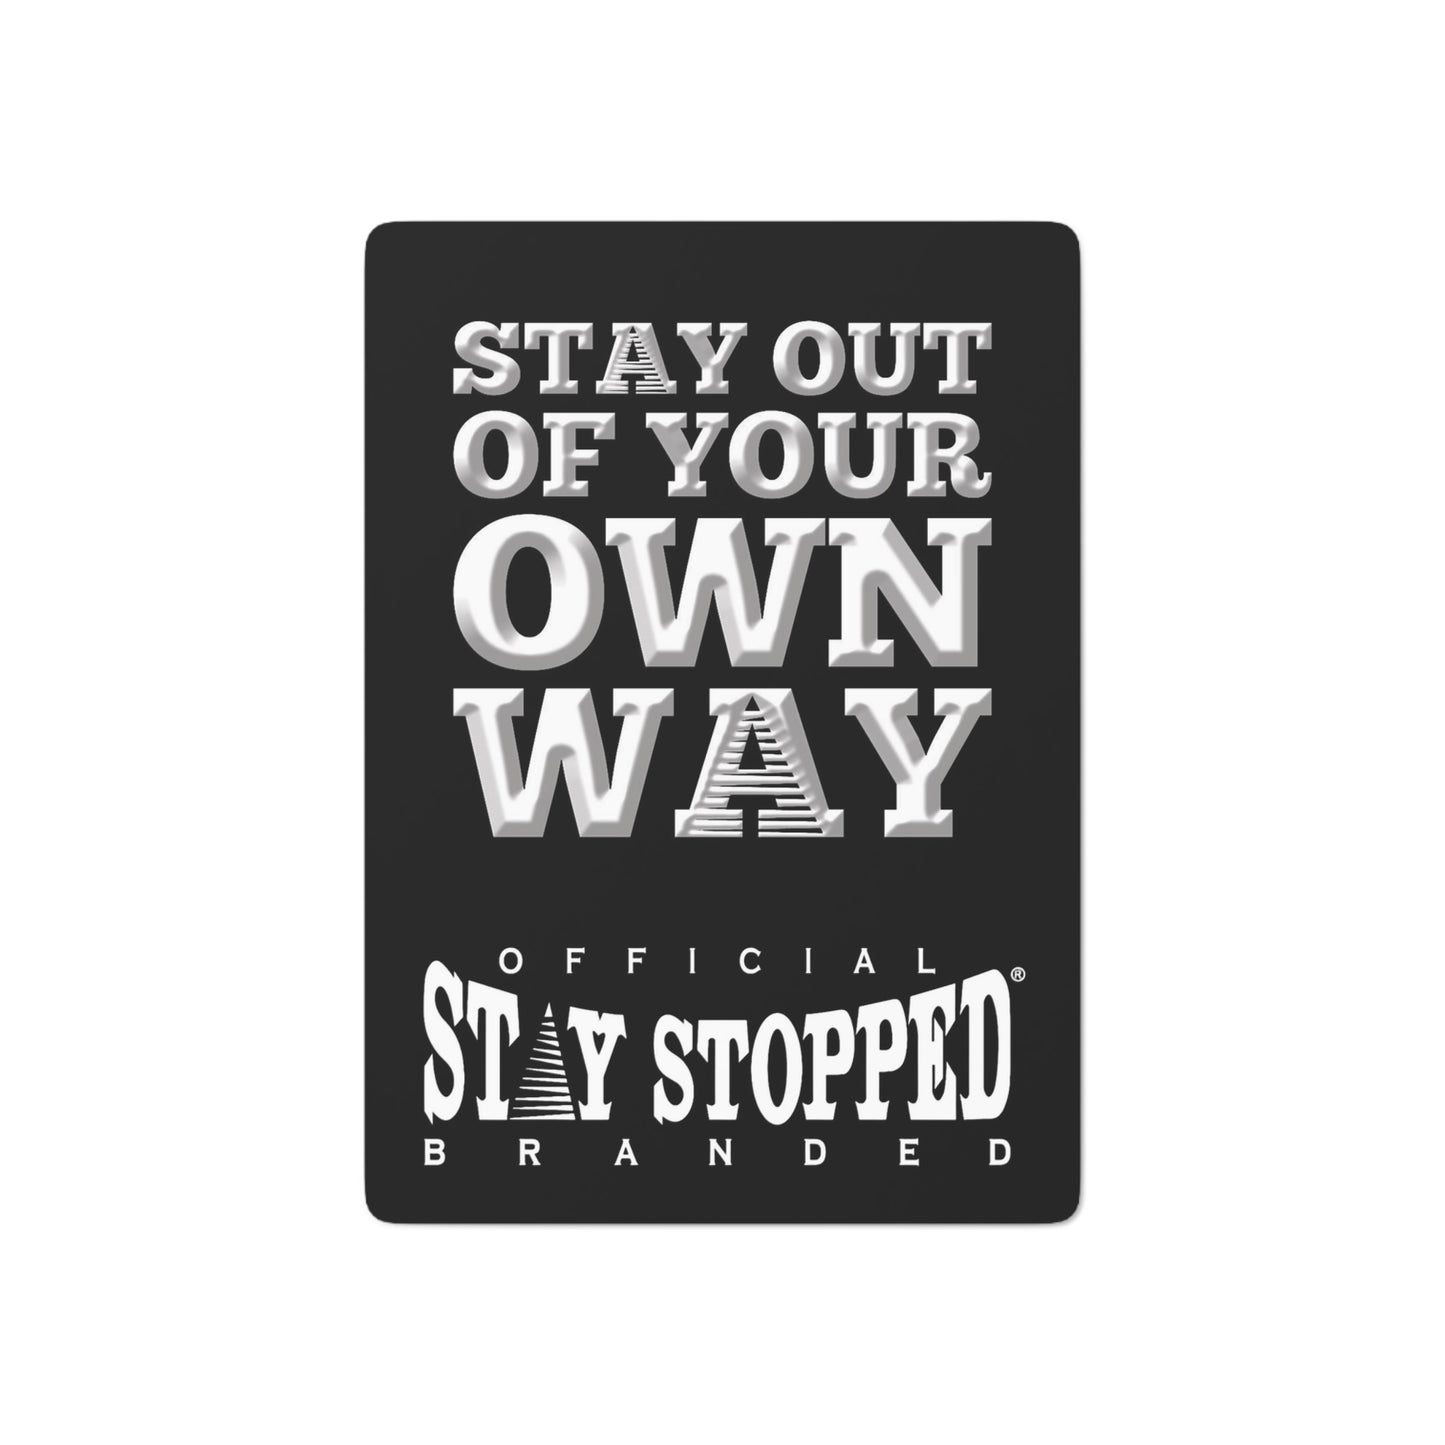 Stay Out of Your Own Way -StayStopped Branded Custom Poker Cards